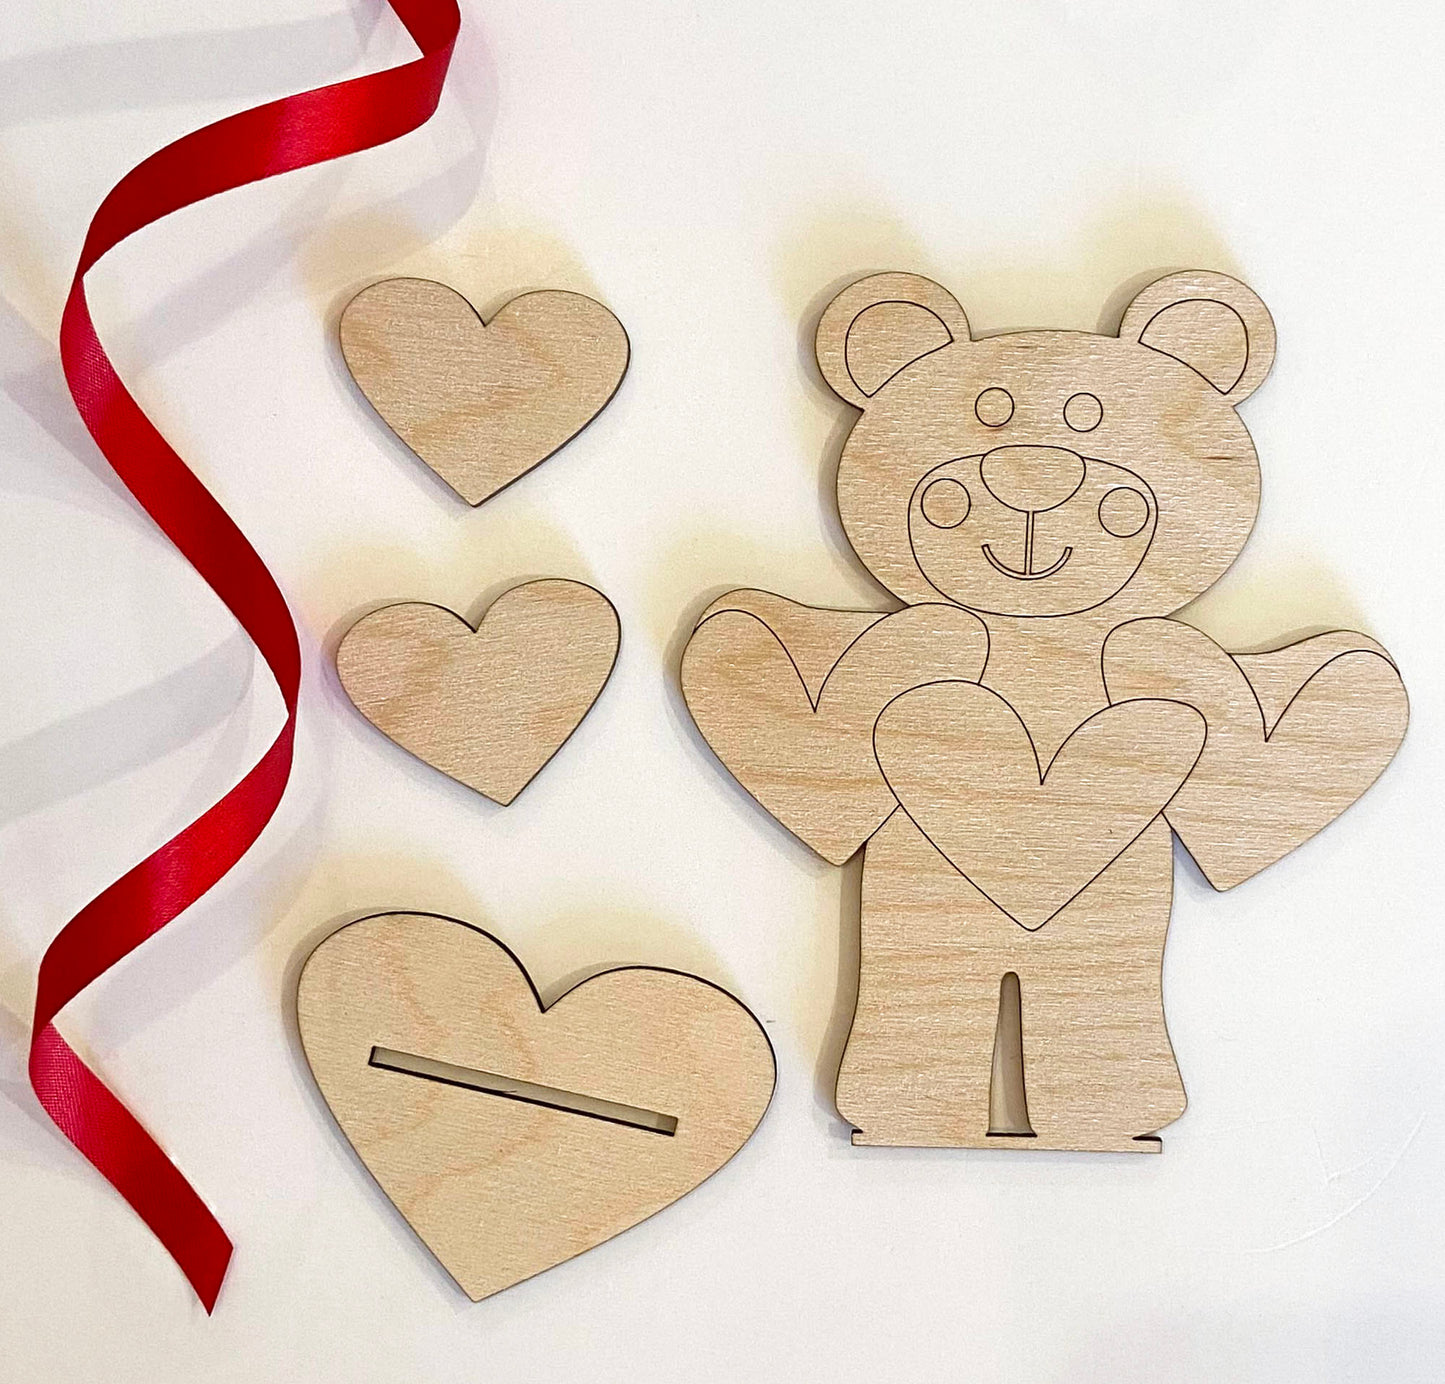 Valentine’s Day Teddy Bears - Ready to Paint